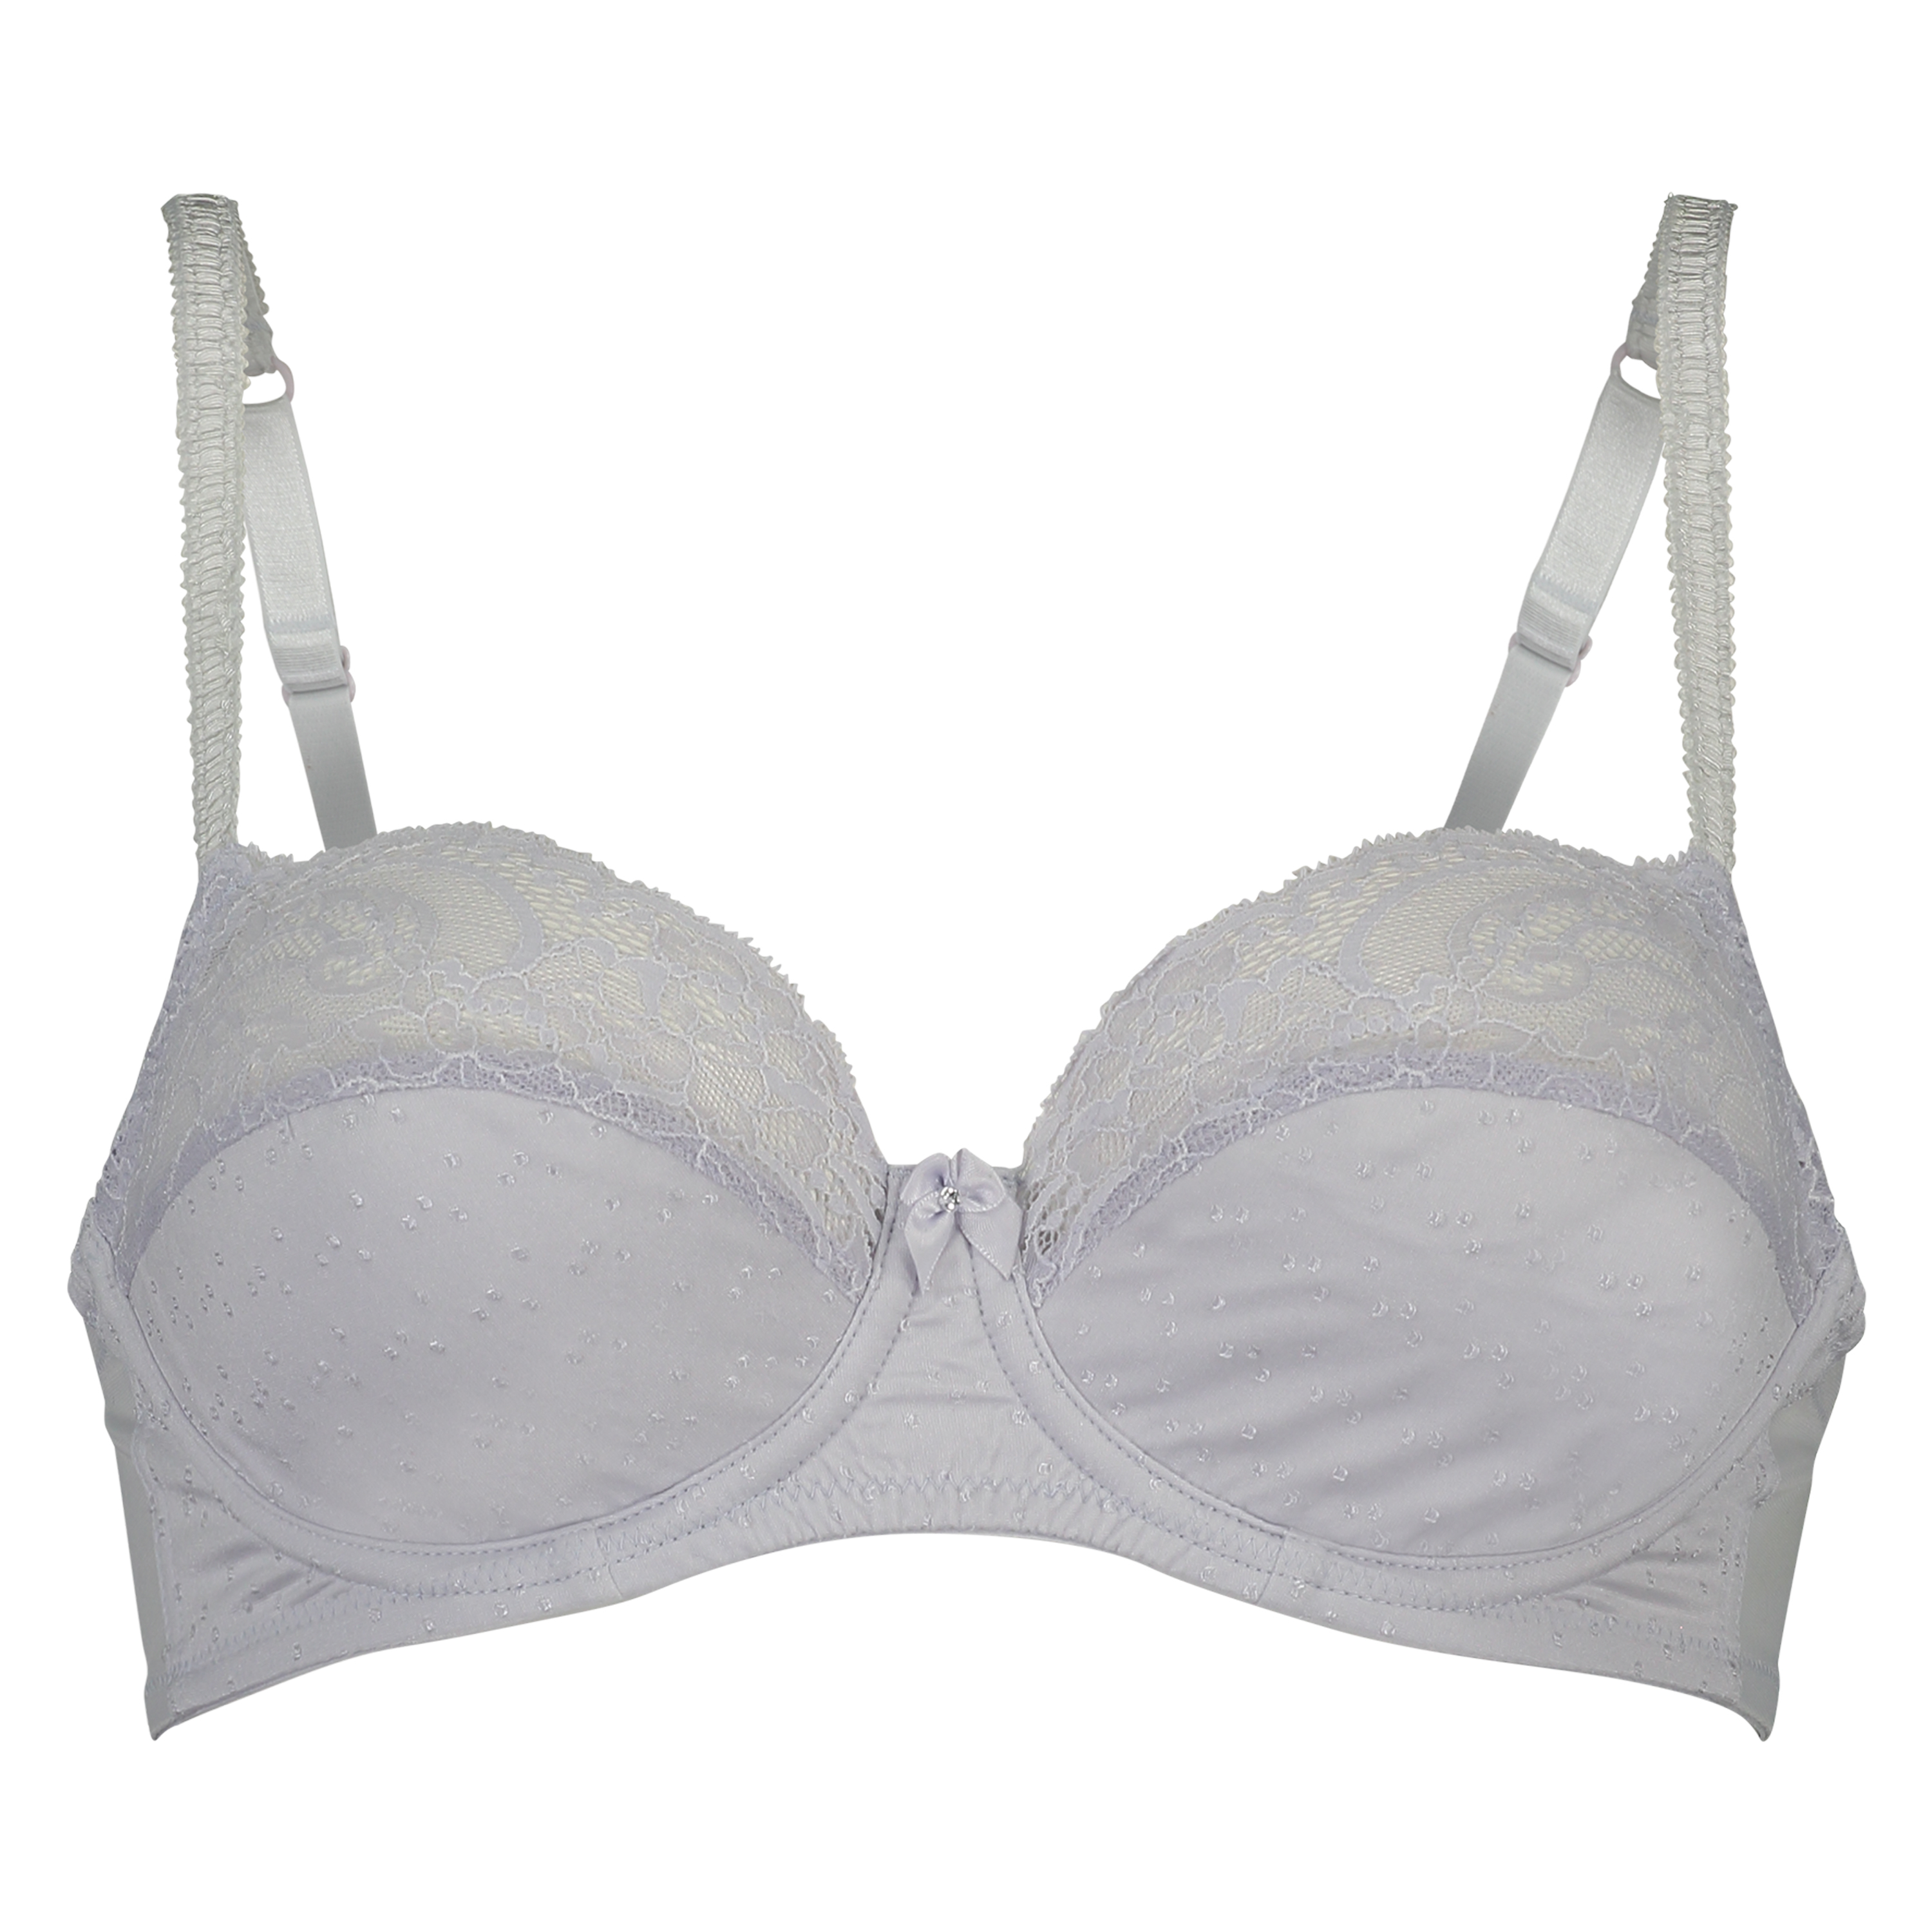 Sophie Non-Padded Underwired Bra, Blue, main